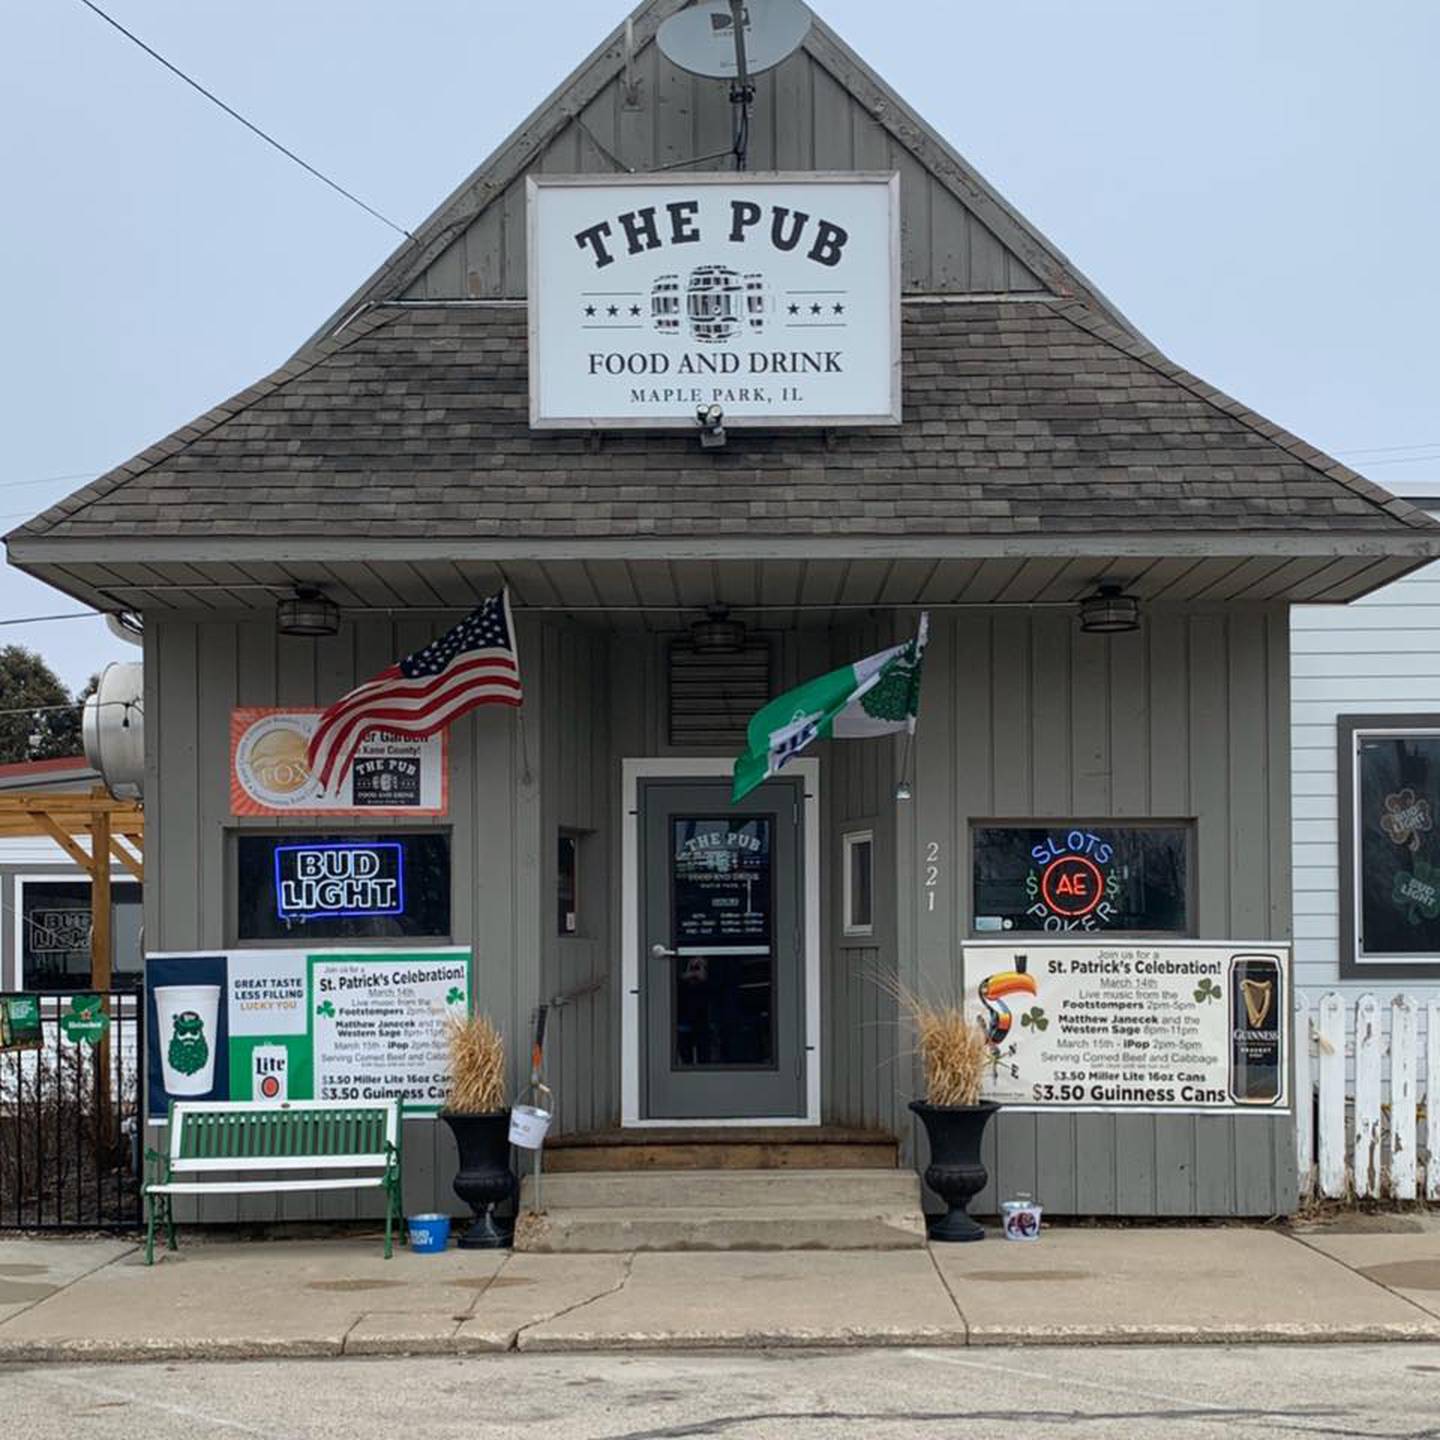 The Pub in Maple Park serves one of the finest burgers in Kane County. (The Pub in Maple Park via Facebook)